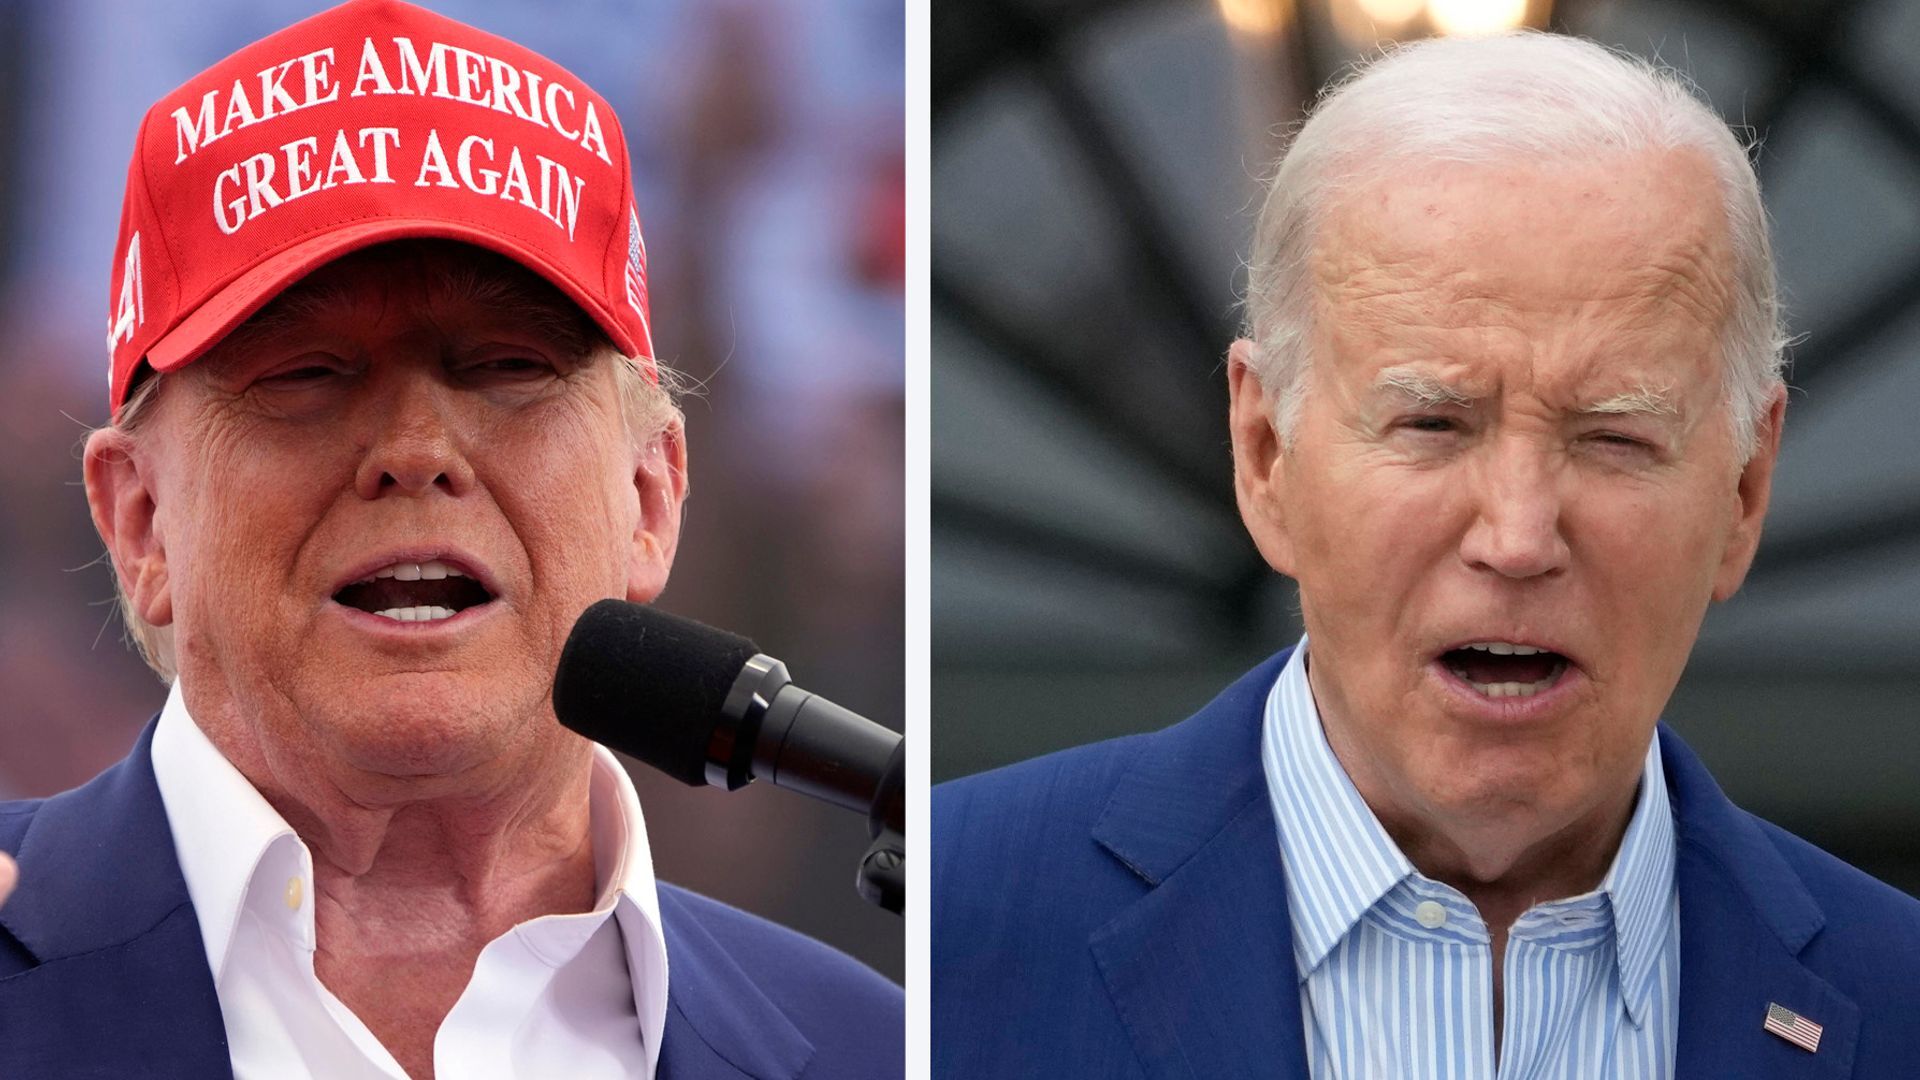 Biden and Trump have agreed on an unconventional set of parameters for the two scheduled presidential debates, but Trump might bail.